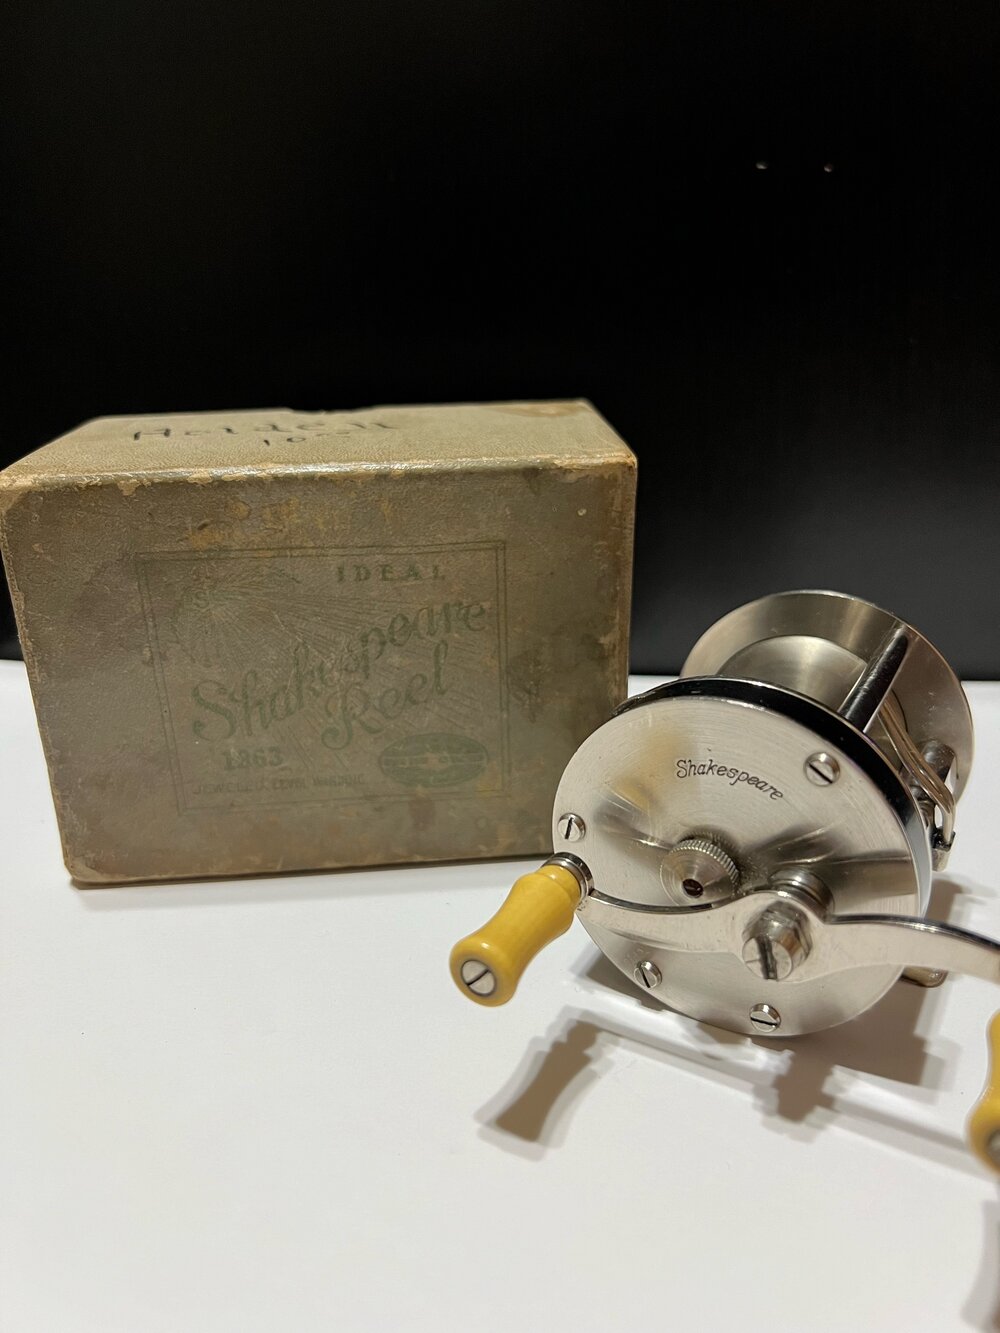 Shakespeare IDEAL No. 1963 Level Wind Jeweled with Green/Grey Original Box  & Extra's Circa-1922 — VINTAGE FISHING REELS